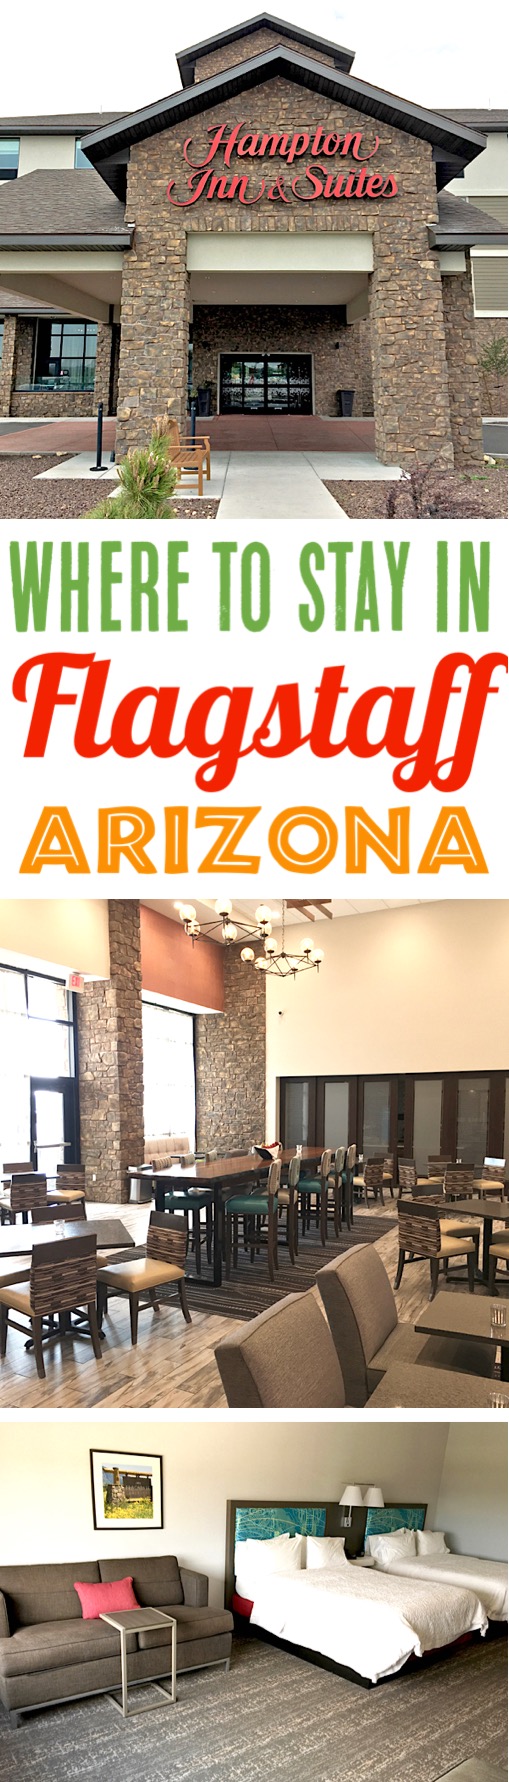 Flagstaff Arizona Things to Do in Summer and Winter + Where to Stay in Flagstaff AZ